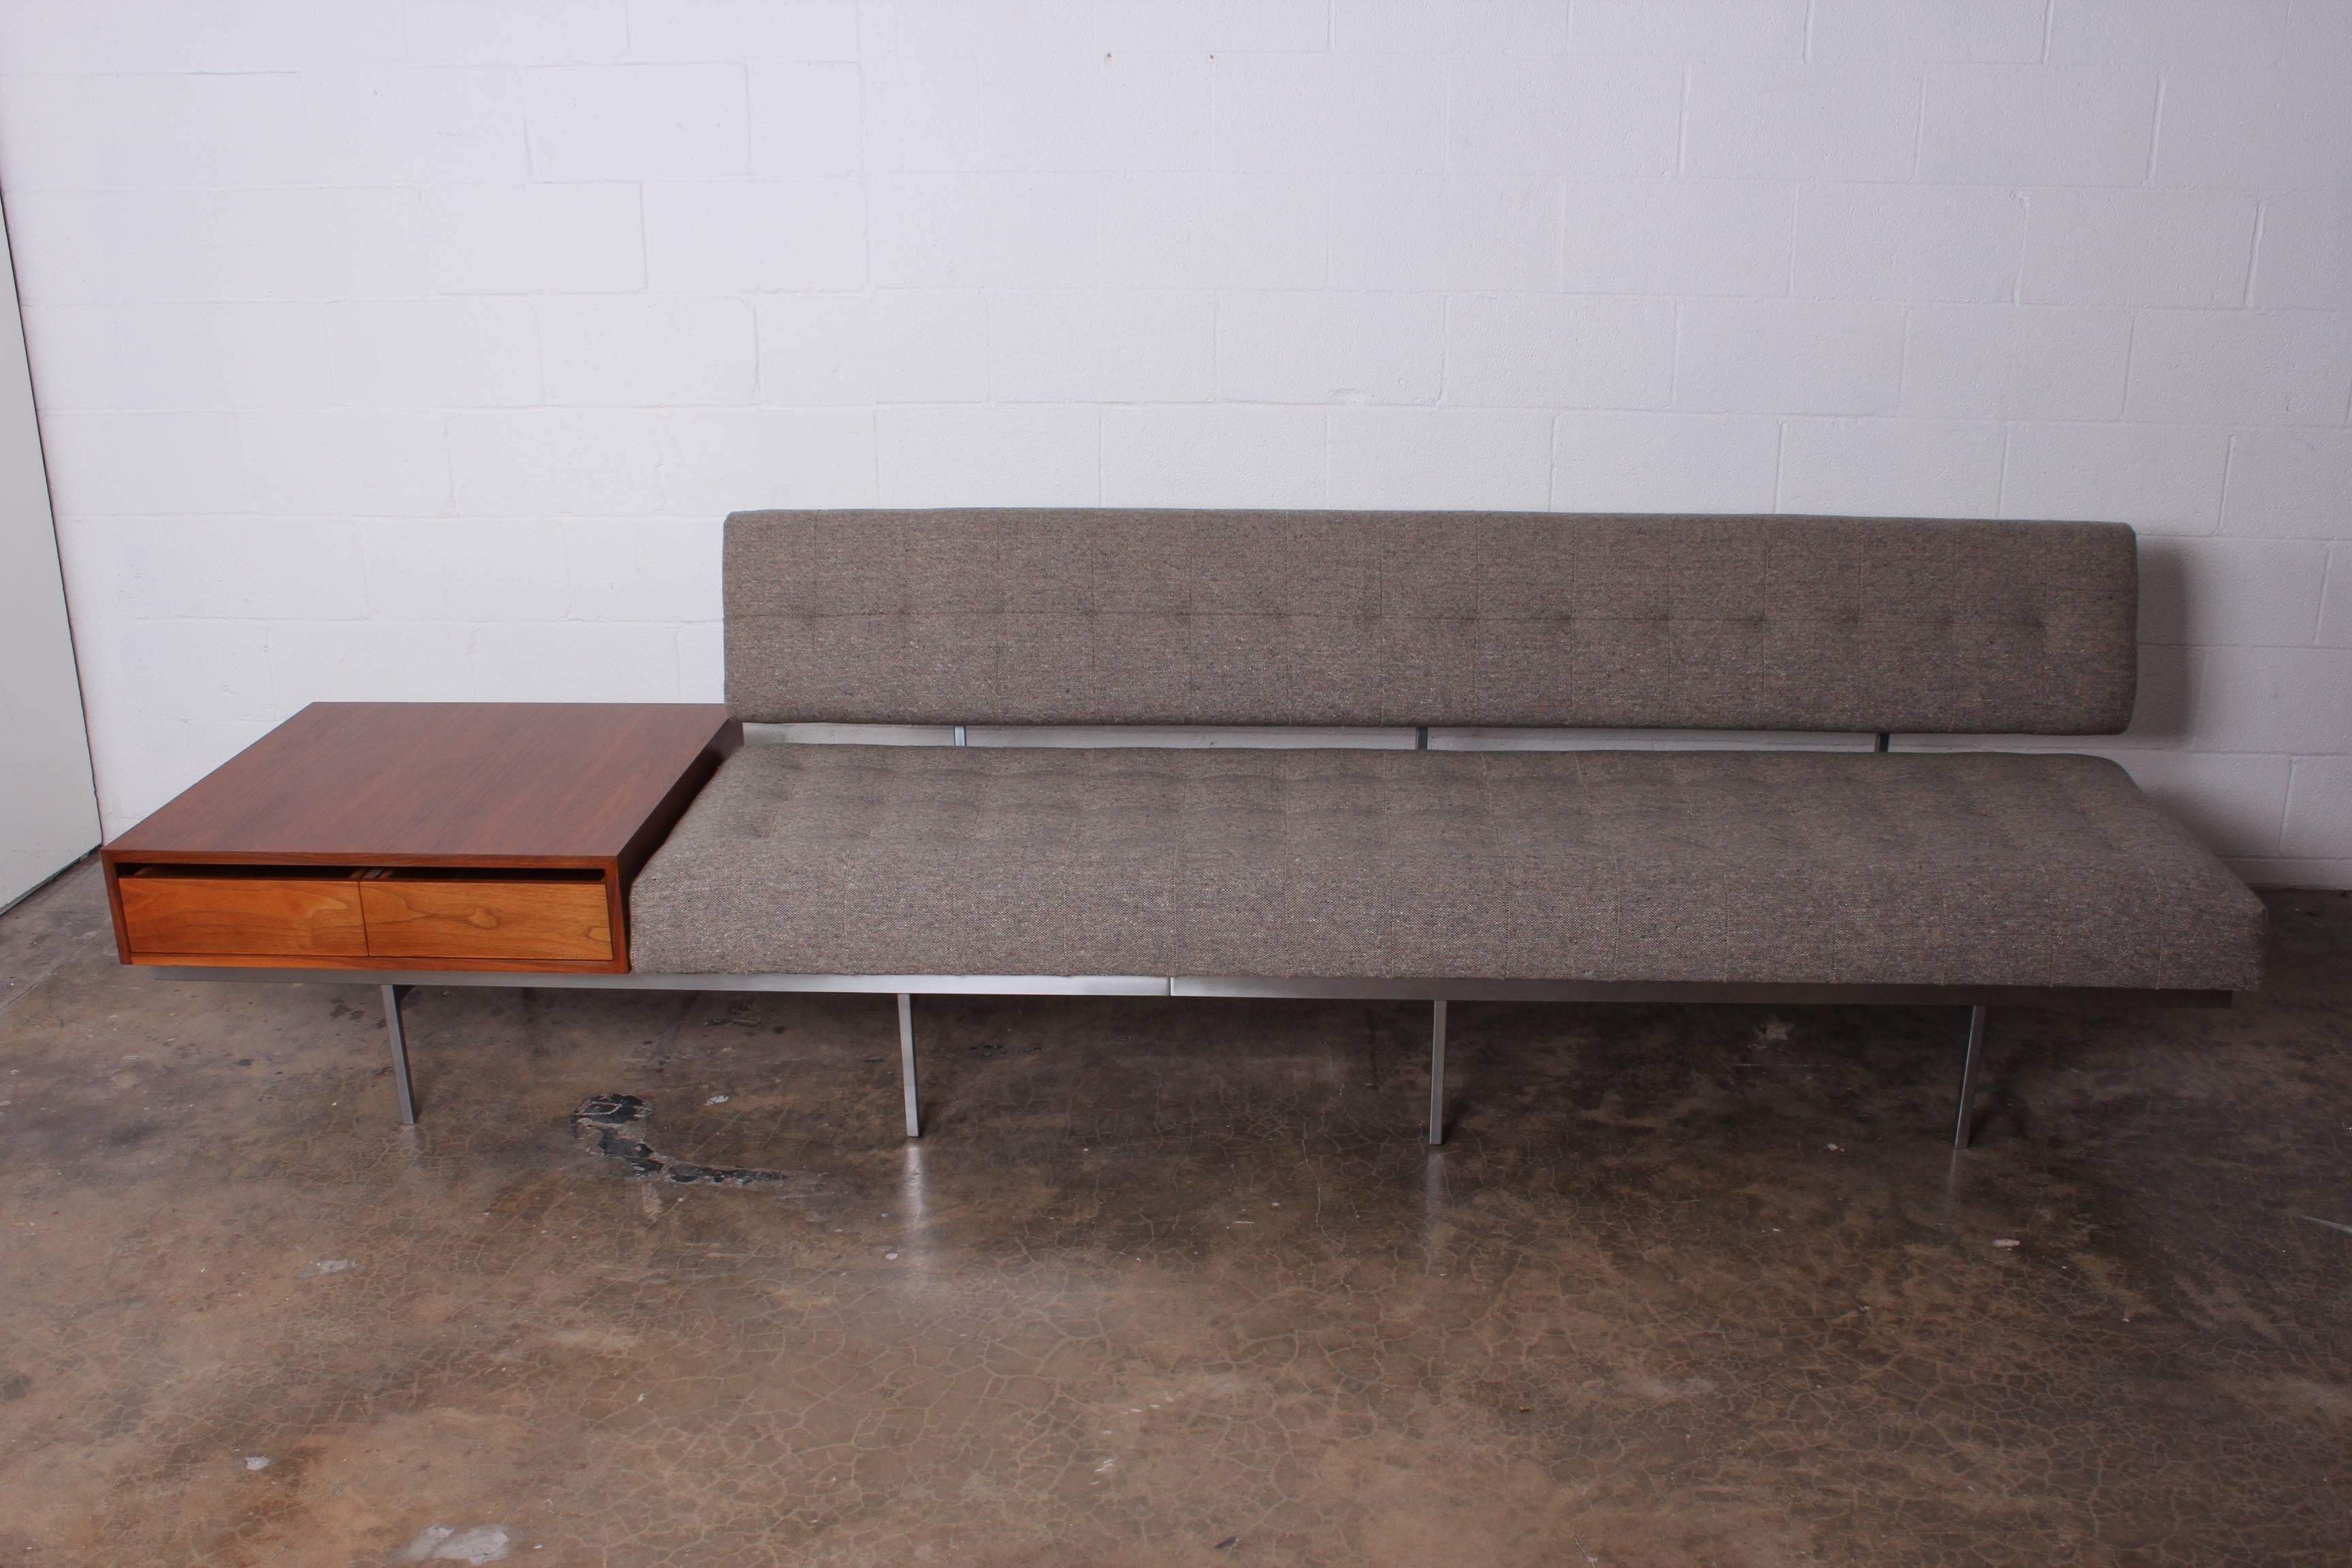 An early Florence Knoll designed sofa with brushed steel frame and attached walnut cabinet with drawers. Fully restored and reupholstered in Maharam wool.